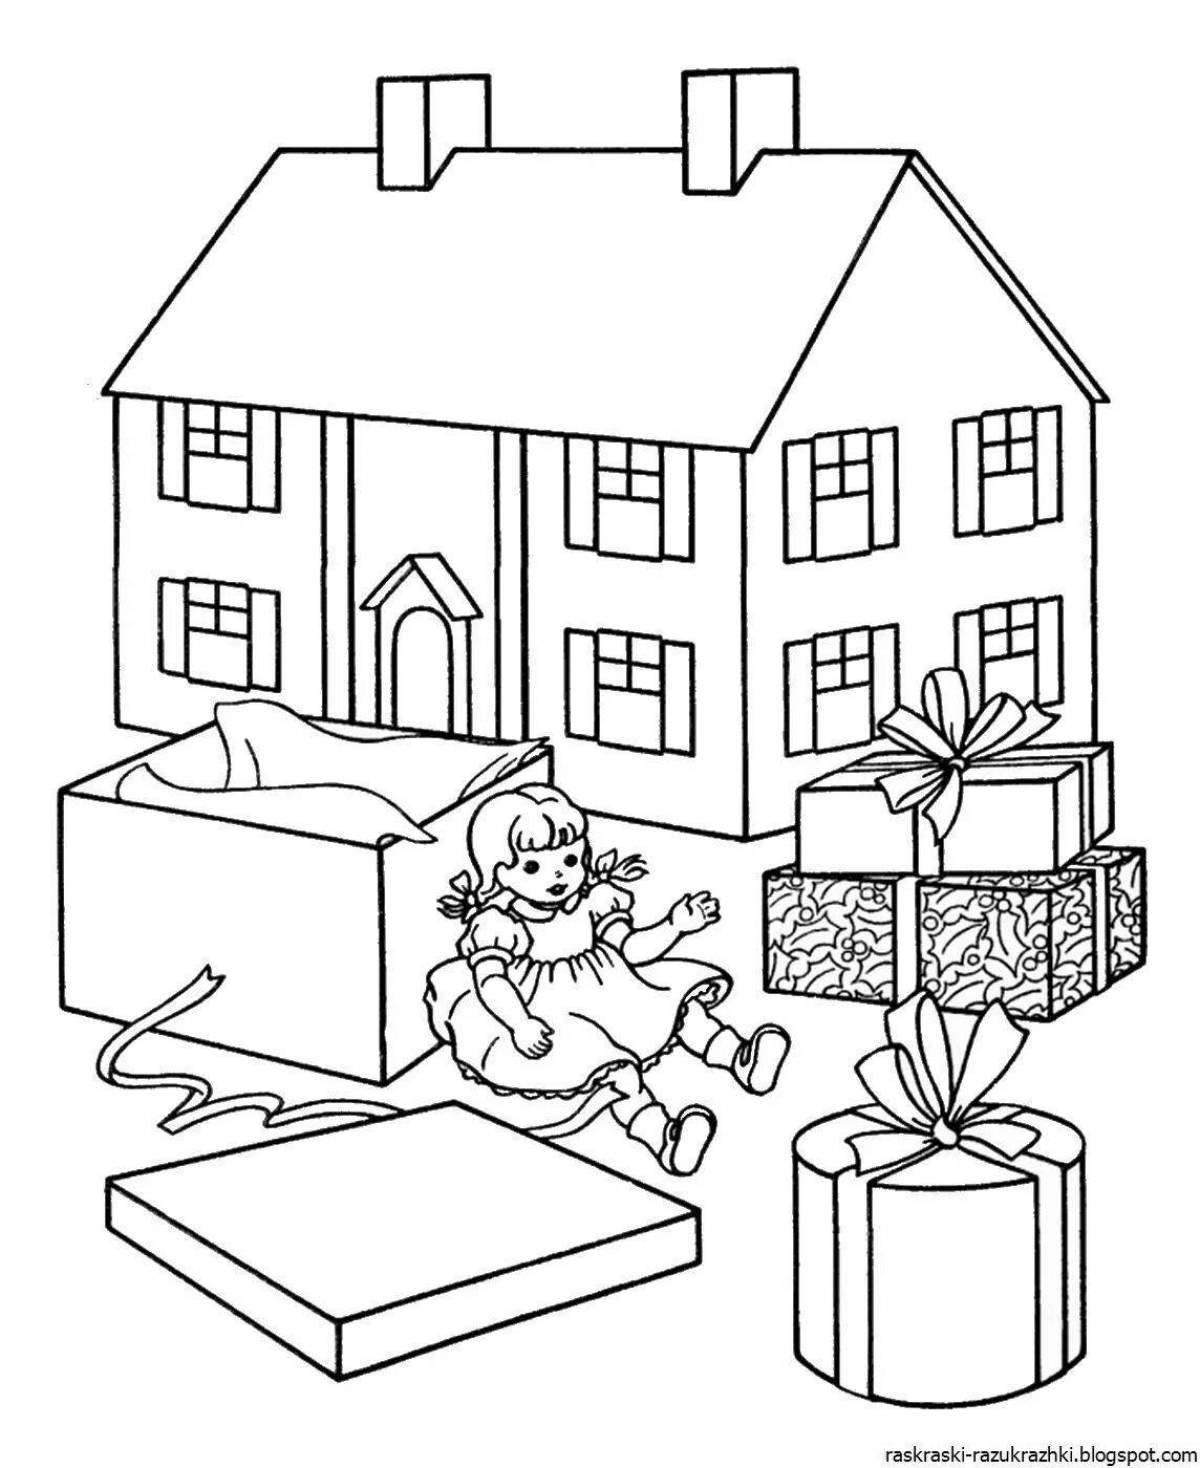 Coloring big house for girls